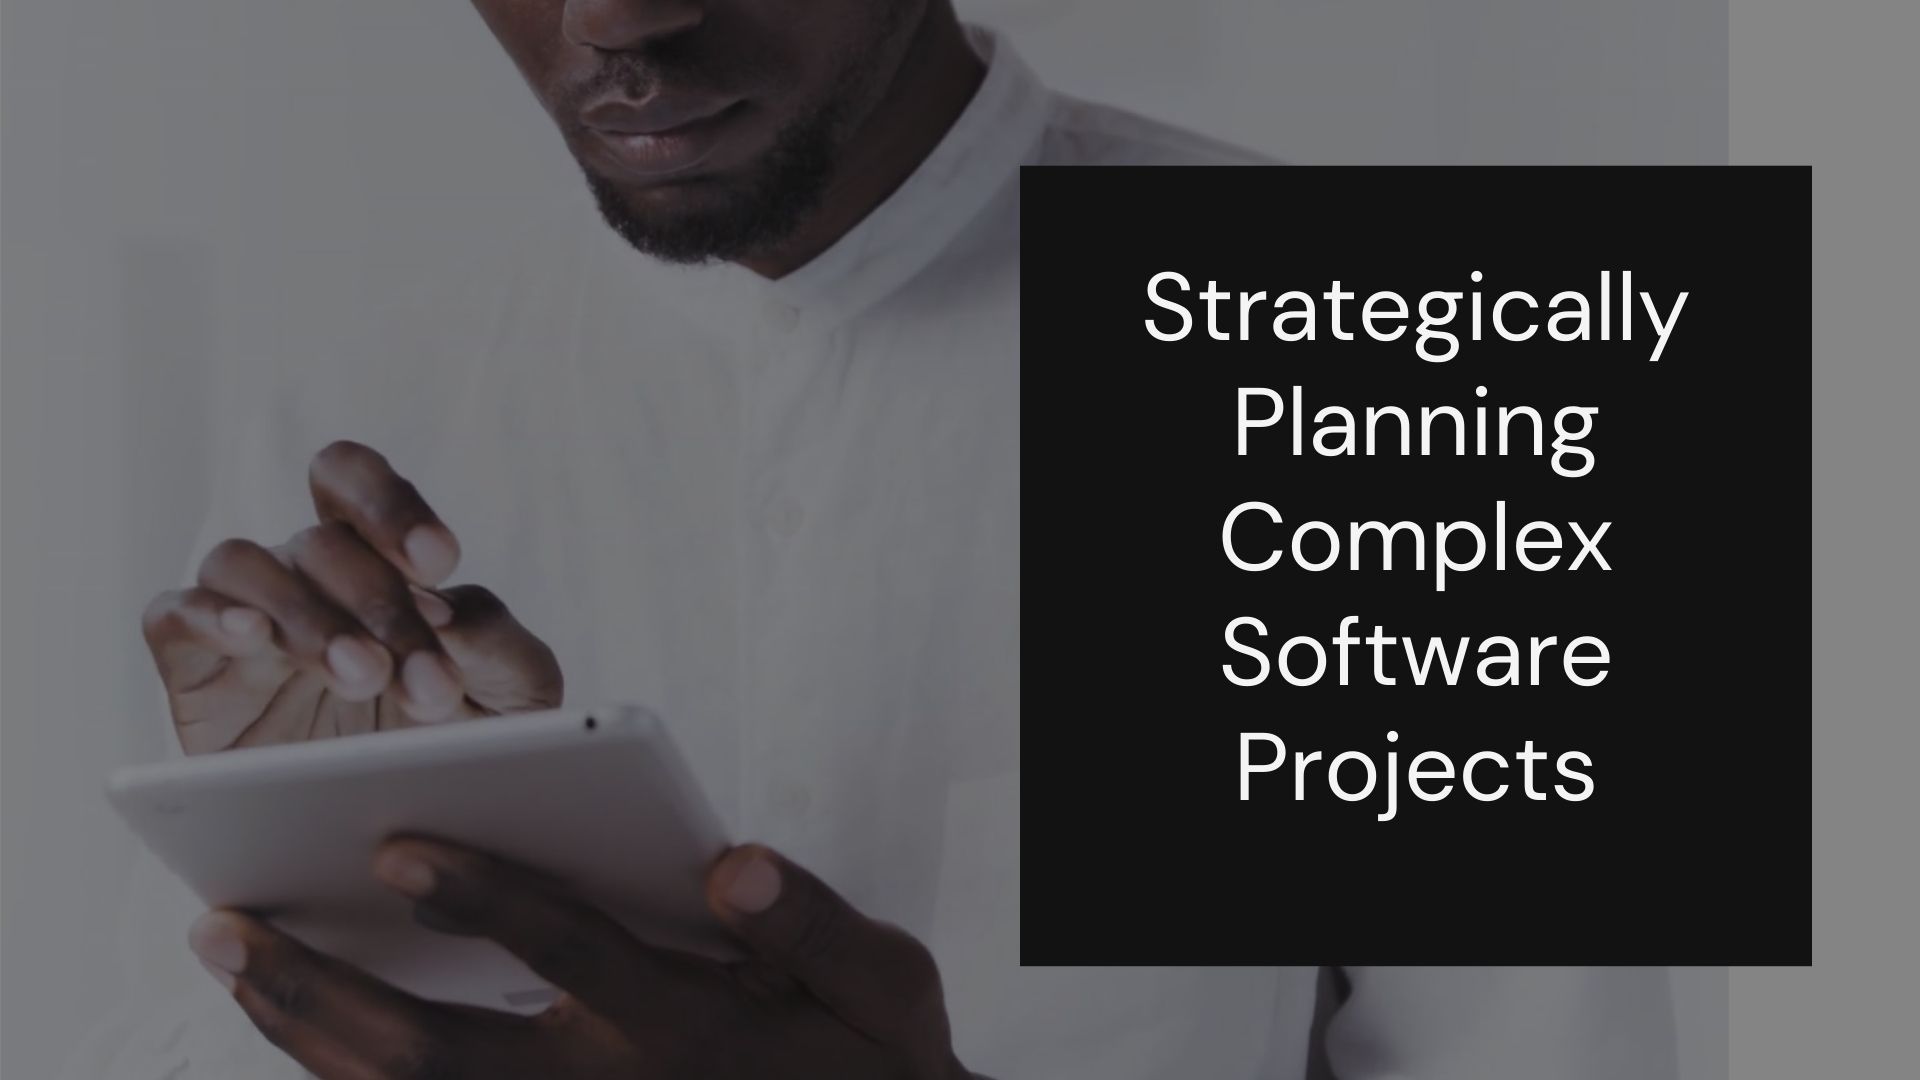 Strategically Planning Complex Software Projects